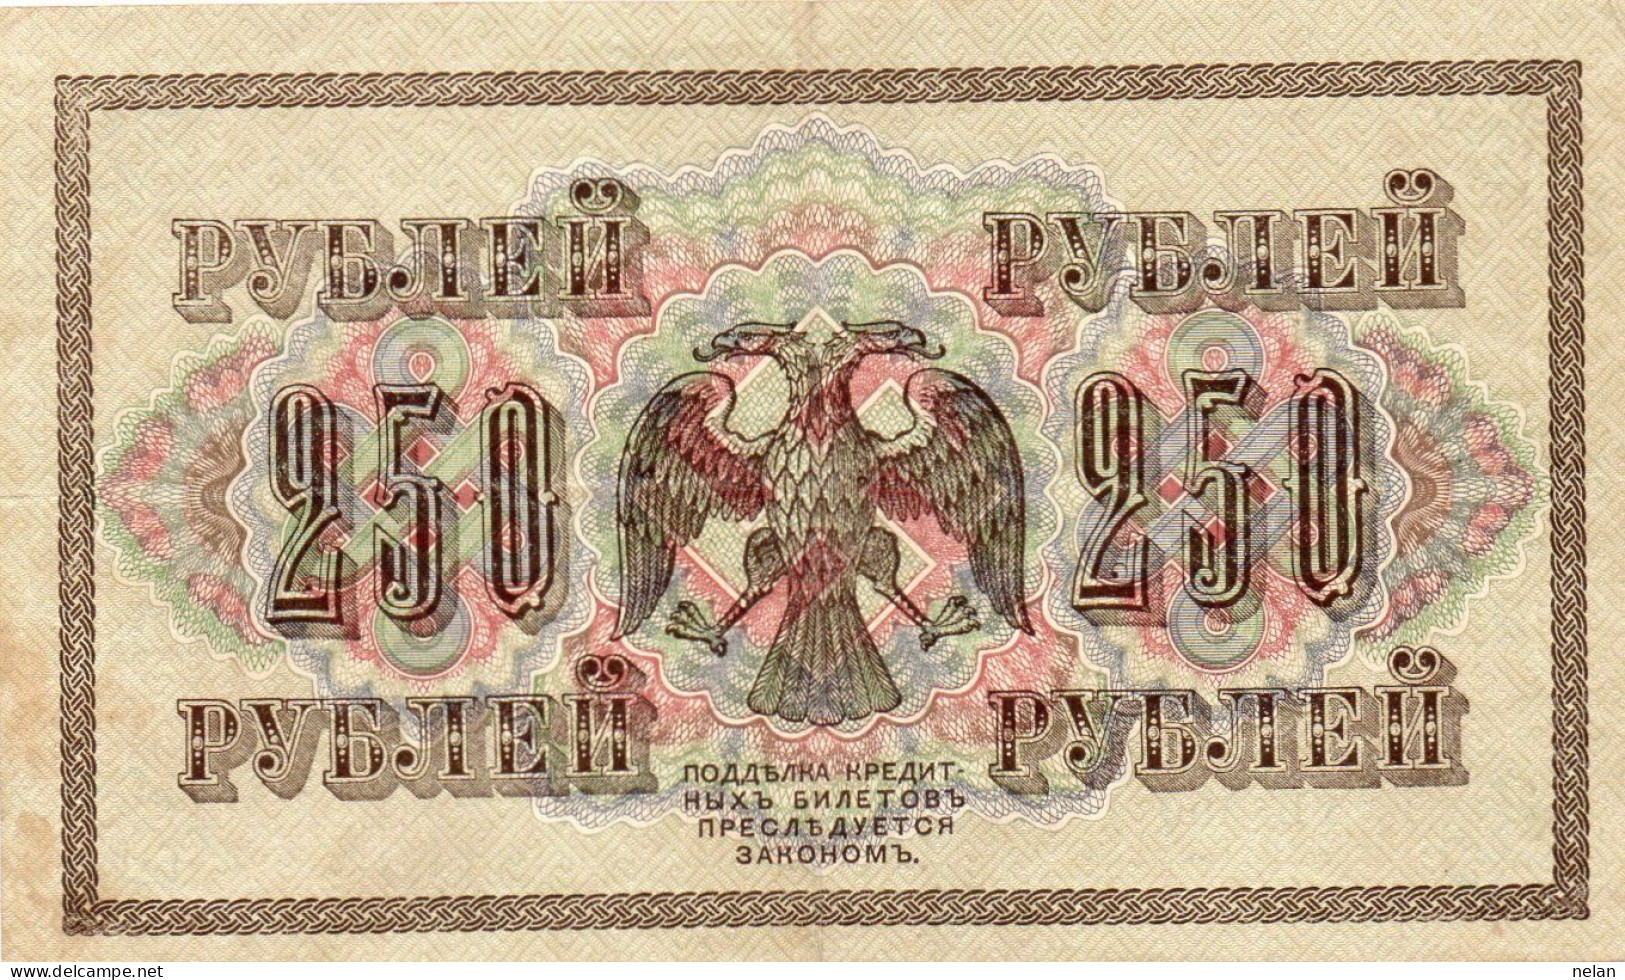 RUSSIA  250 RUBLES 1917   P-36.2.1  XF+AUNC  SERIE AB-300 - Russland